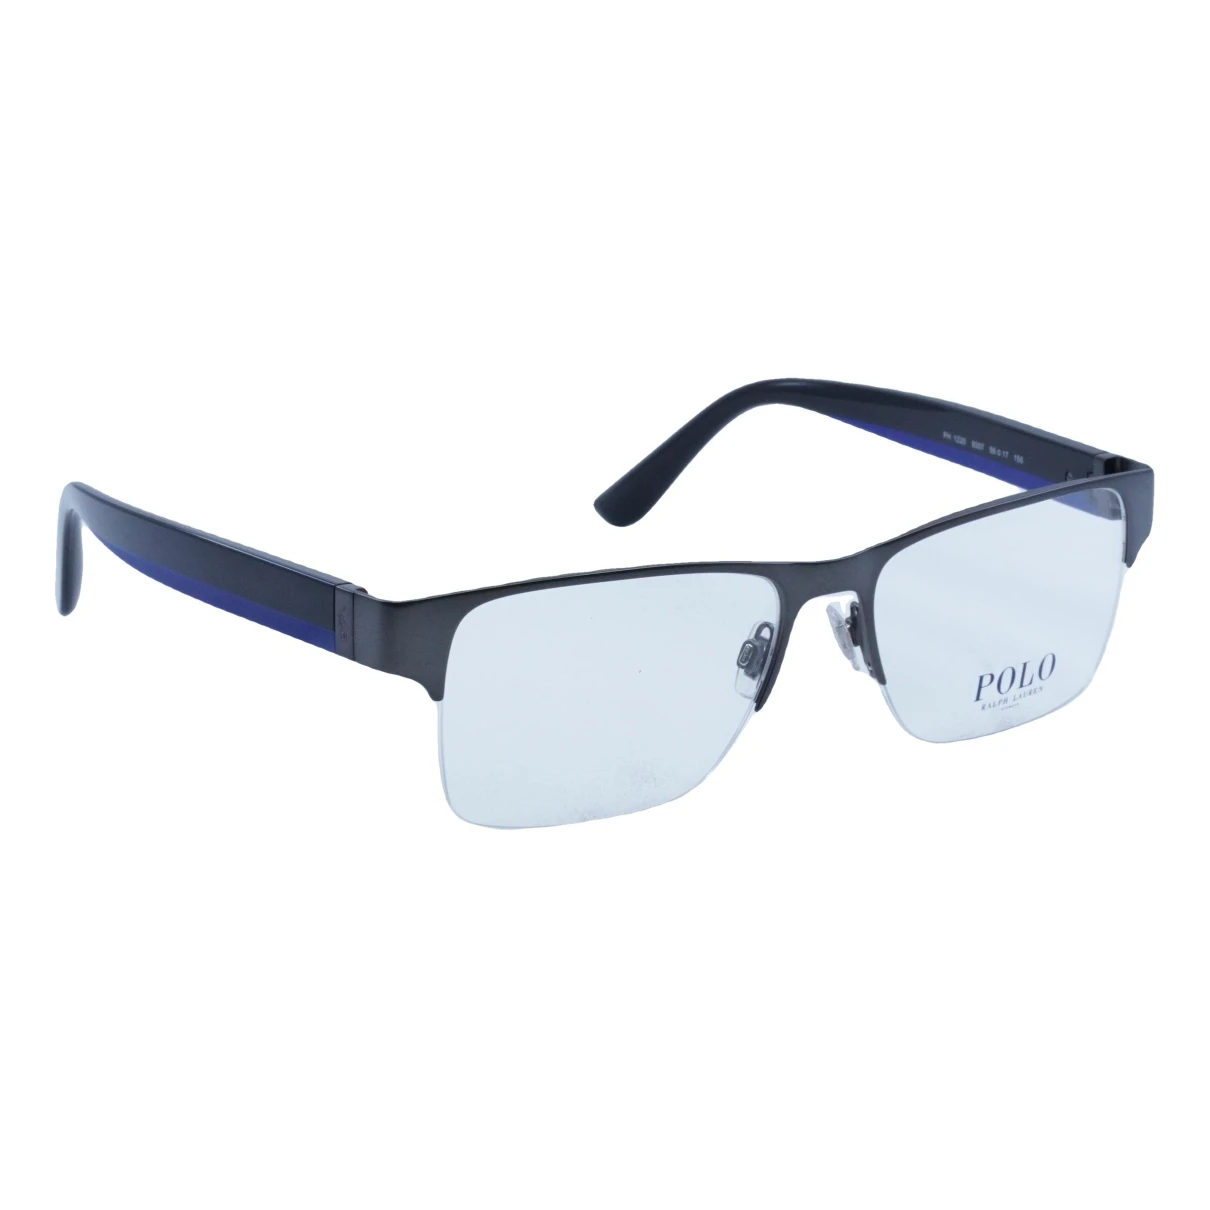 Pre-owned Polo Ralph Lauren Sunglasses In Grey